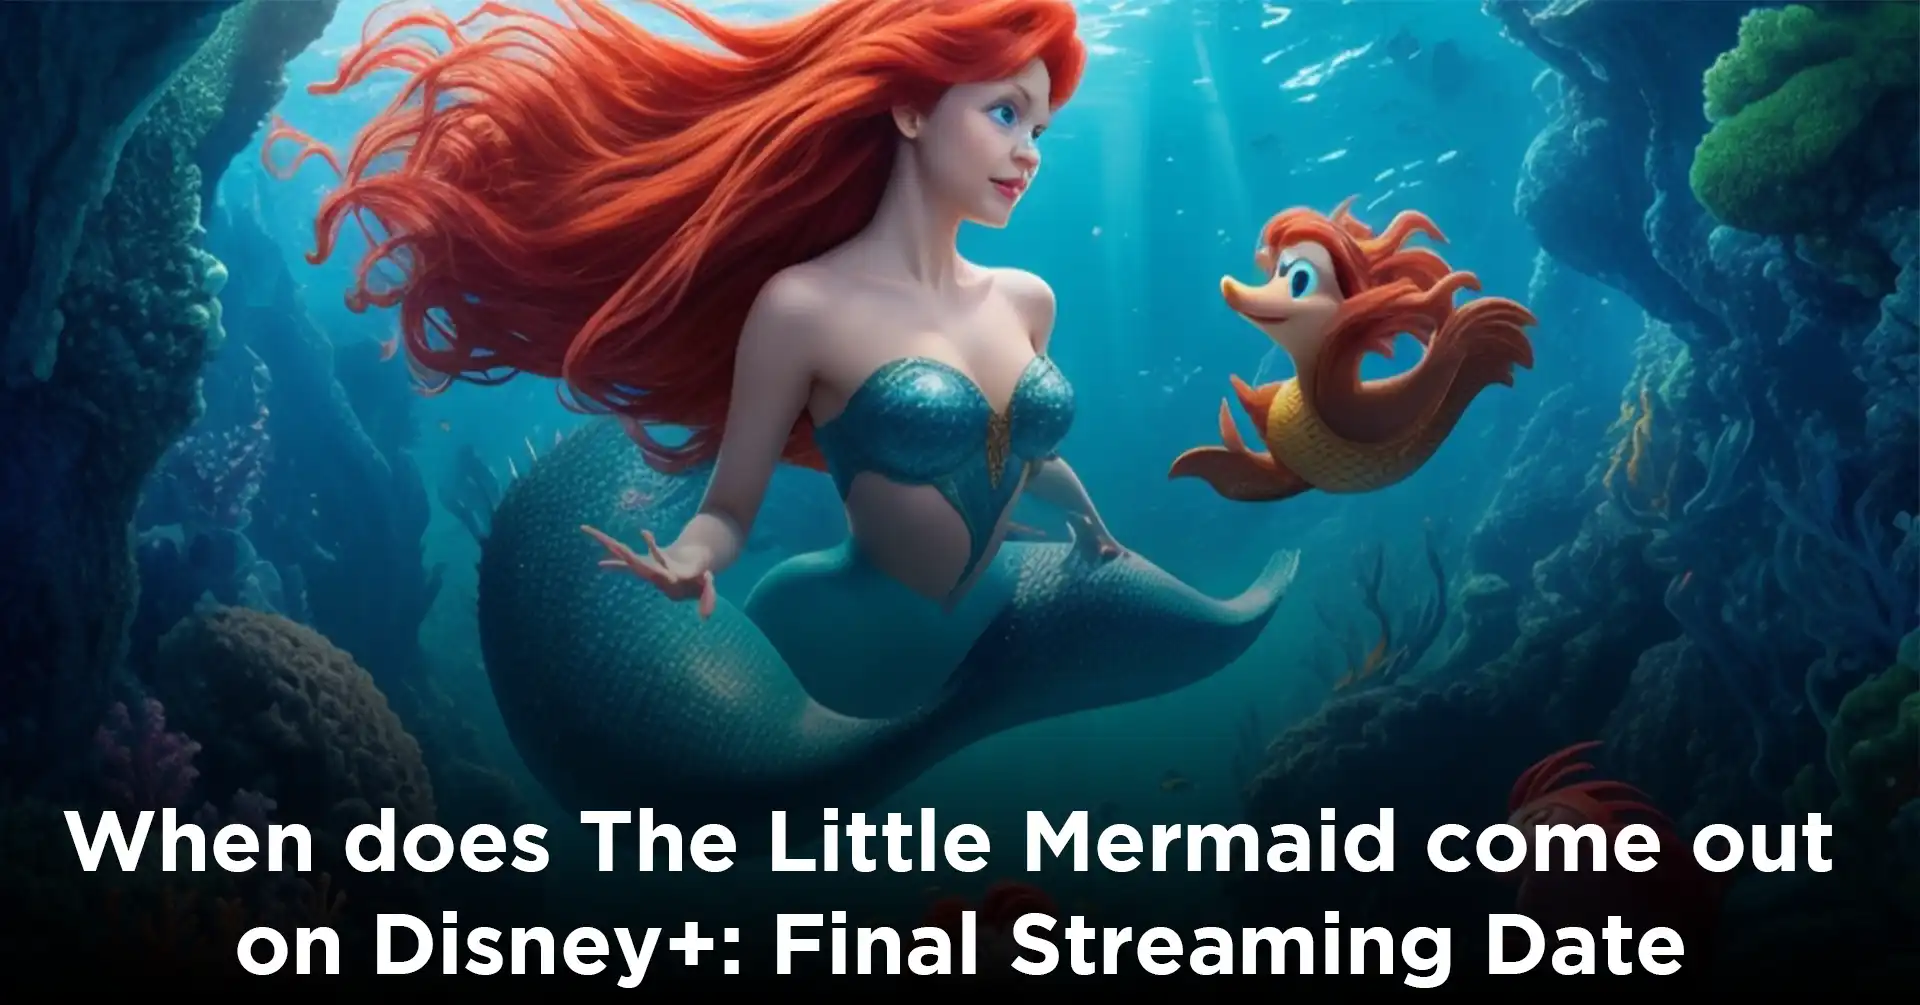 When does The Little Mermaid come out on Disney+ Final Streaming Date